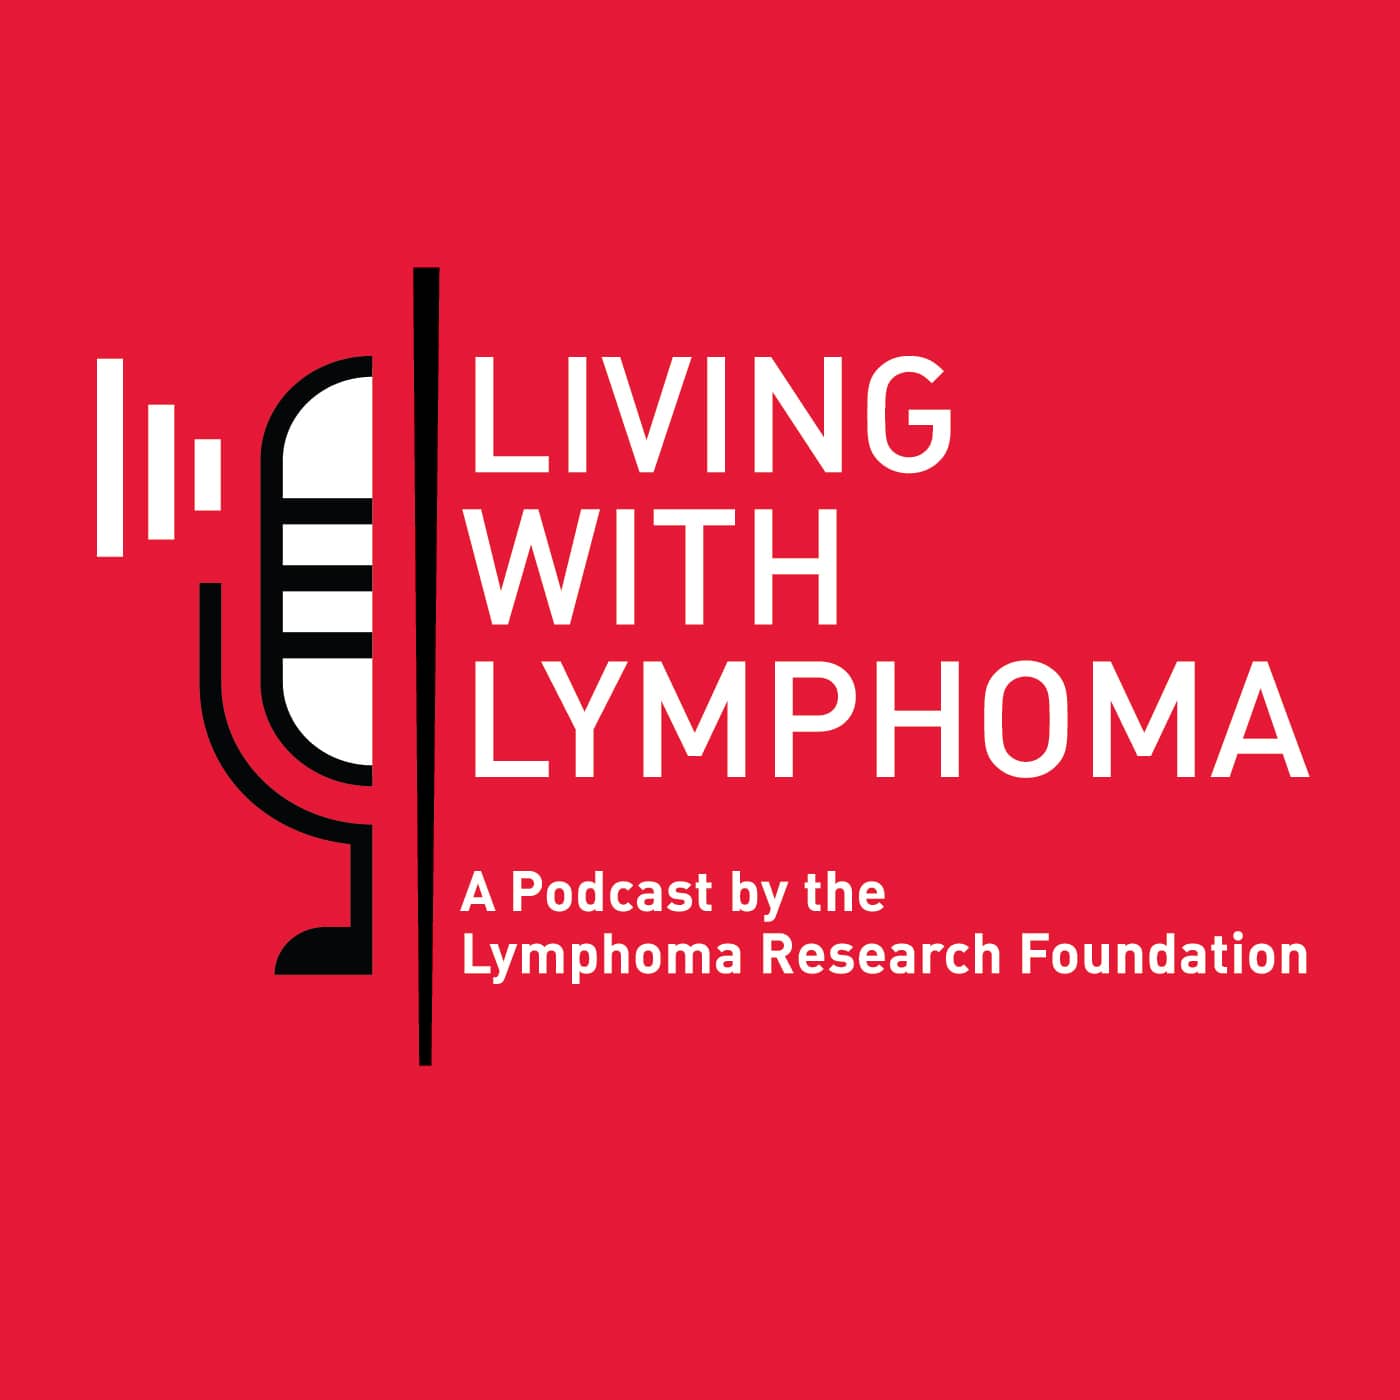 Telehealth for Lymphoma Patients